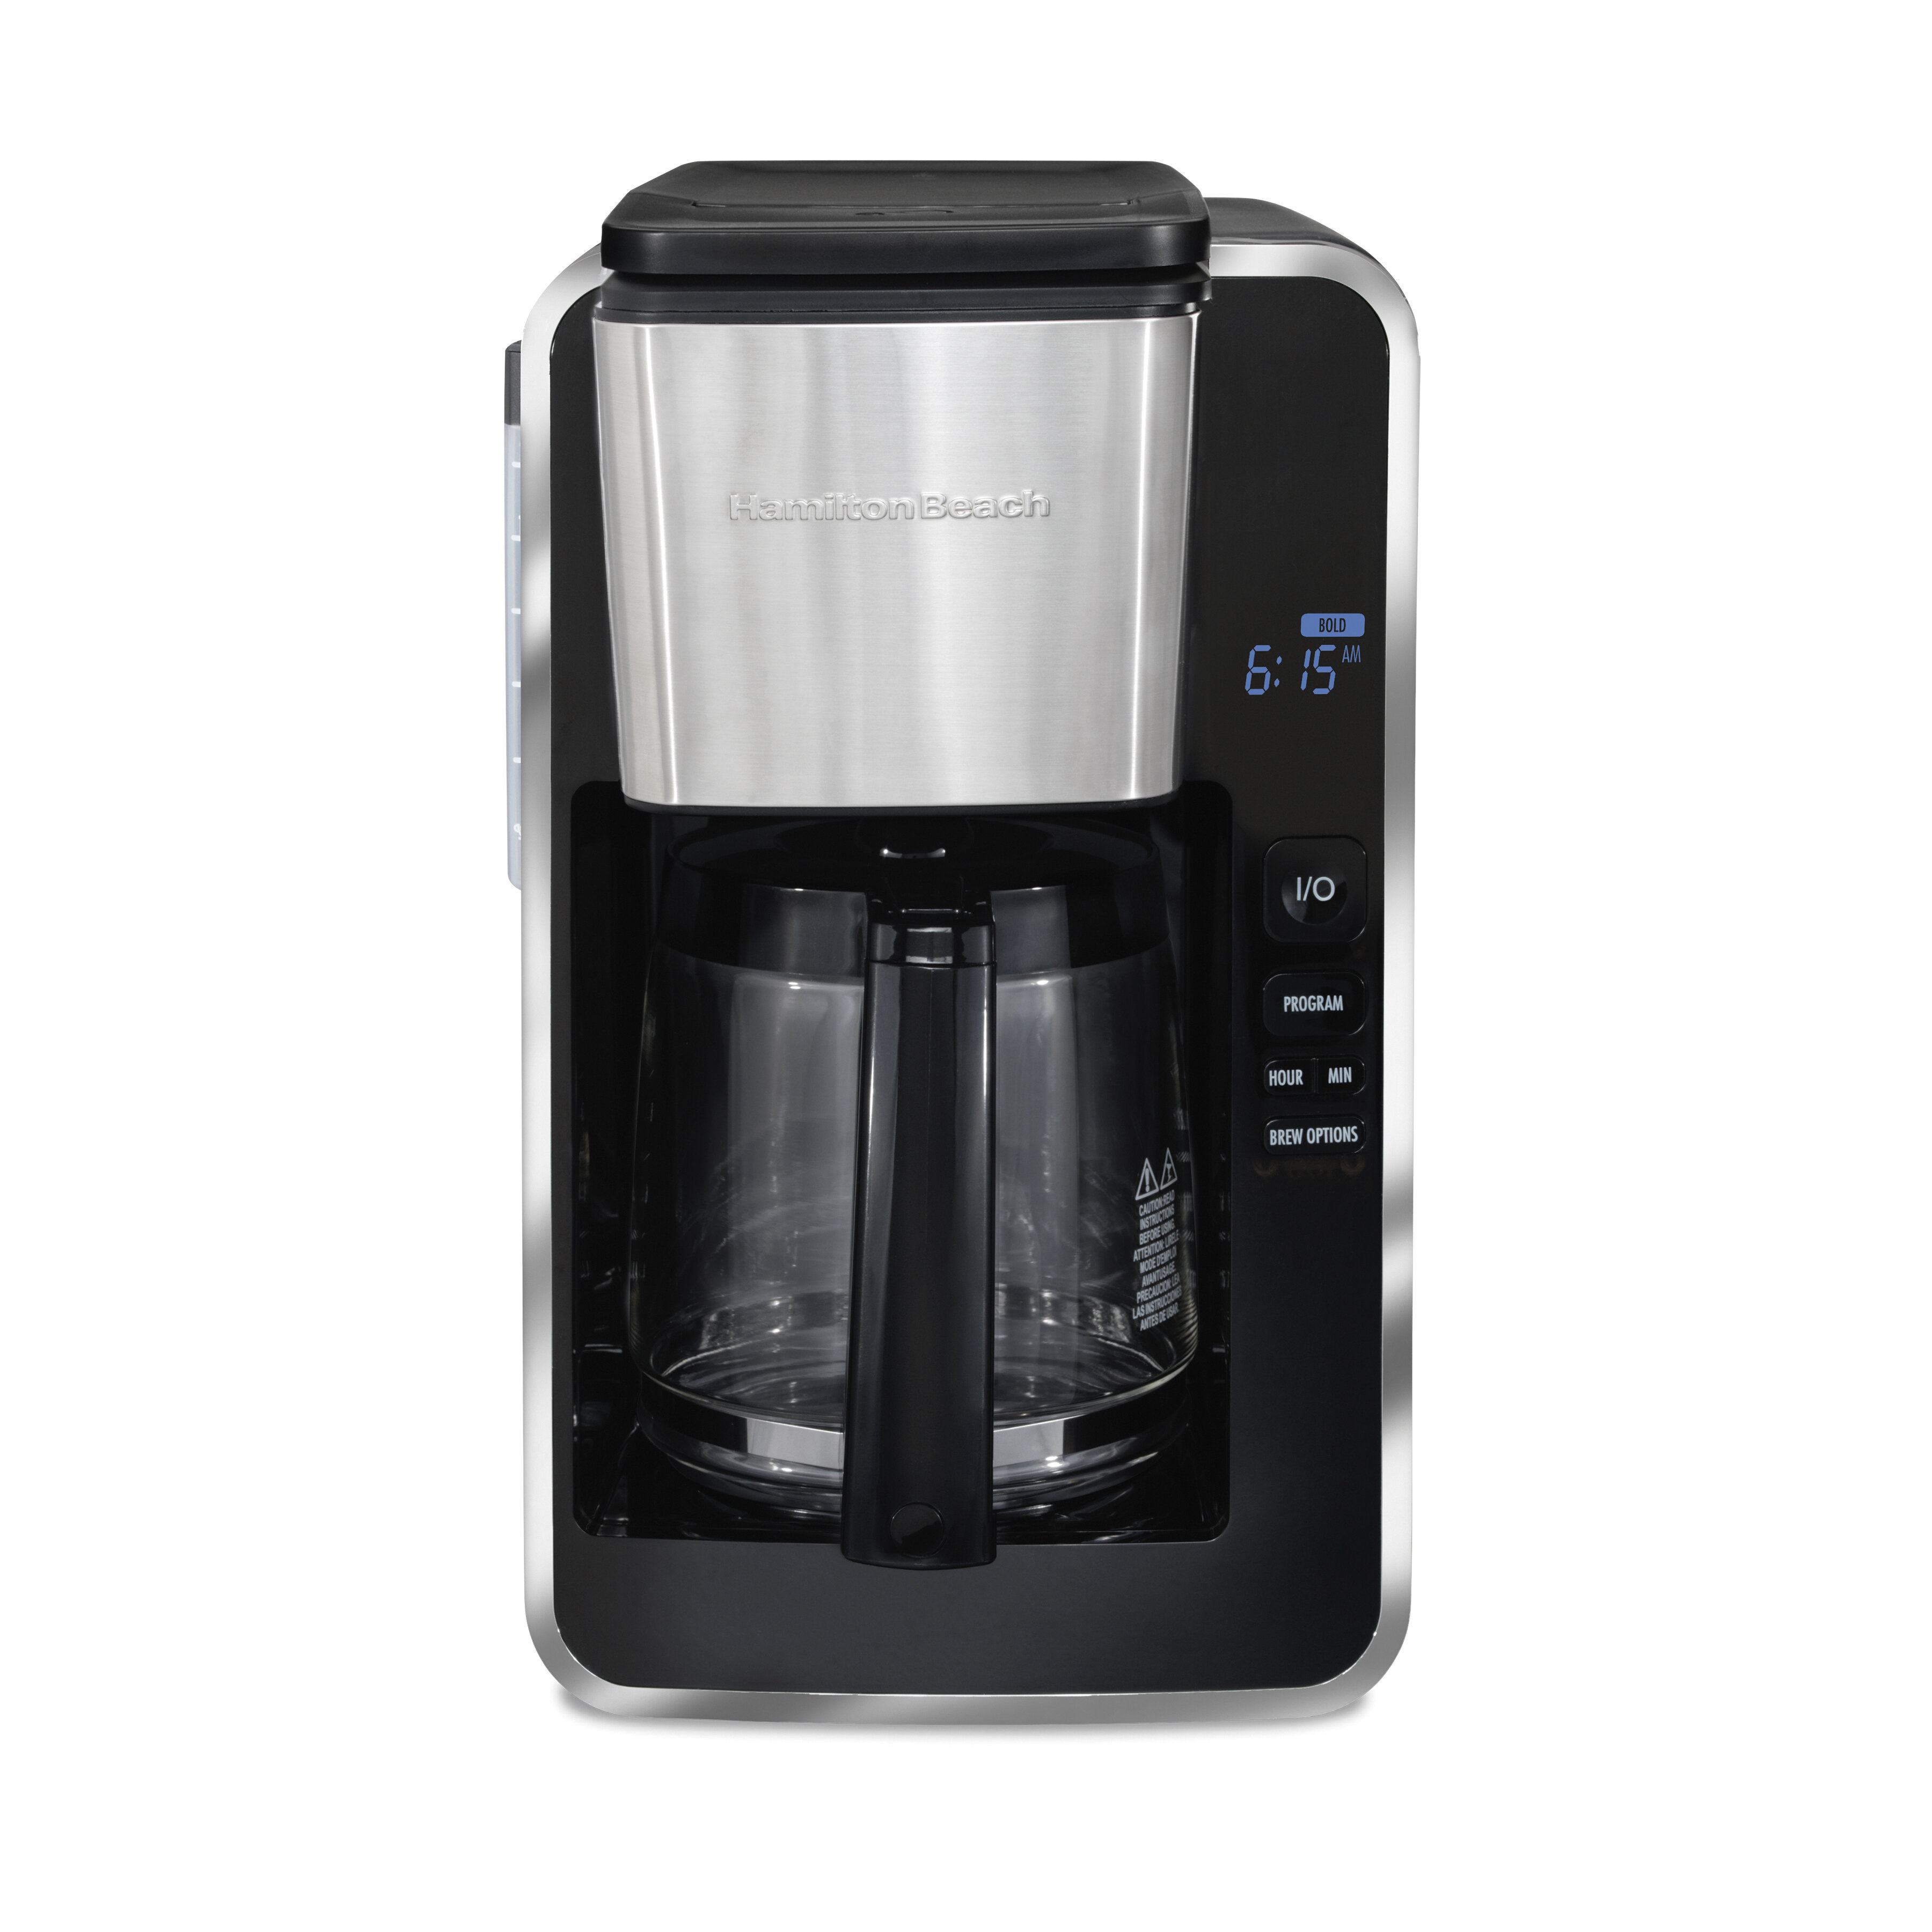 Hamilton Beach® FrontFill Deluxe 12 Cup Programmable Coffee Maker & Reviews